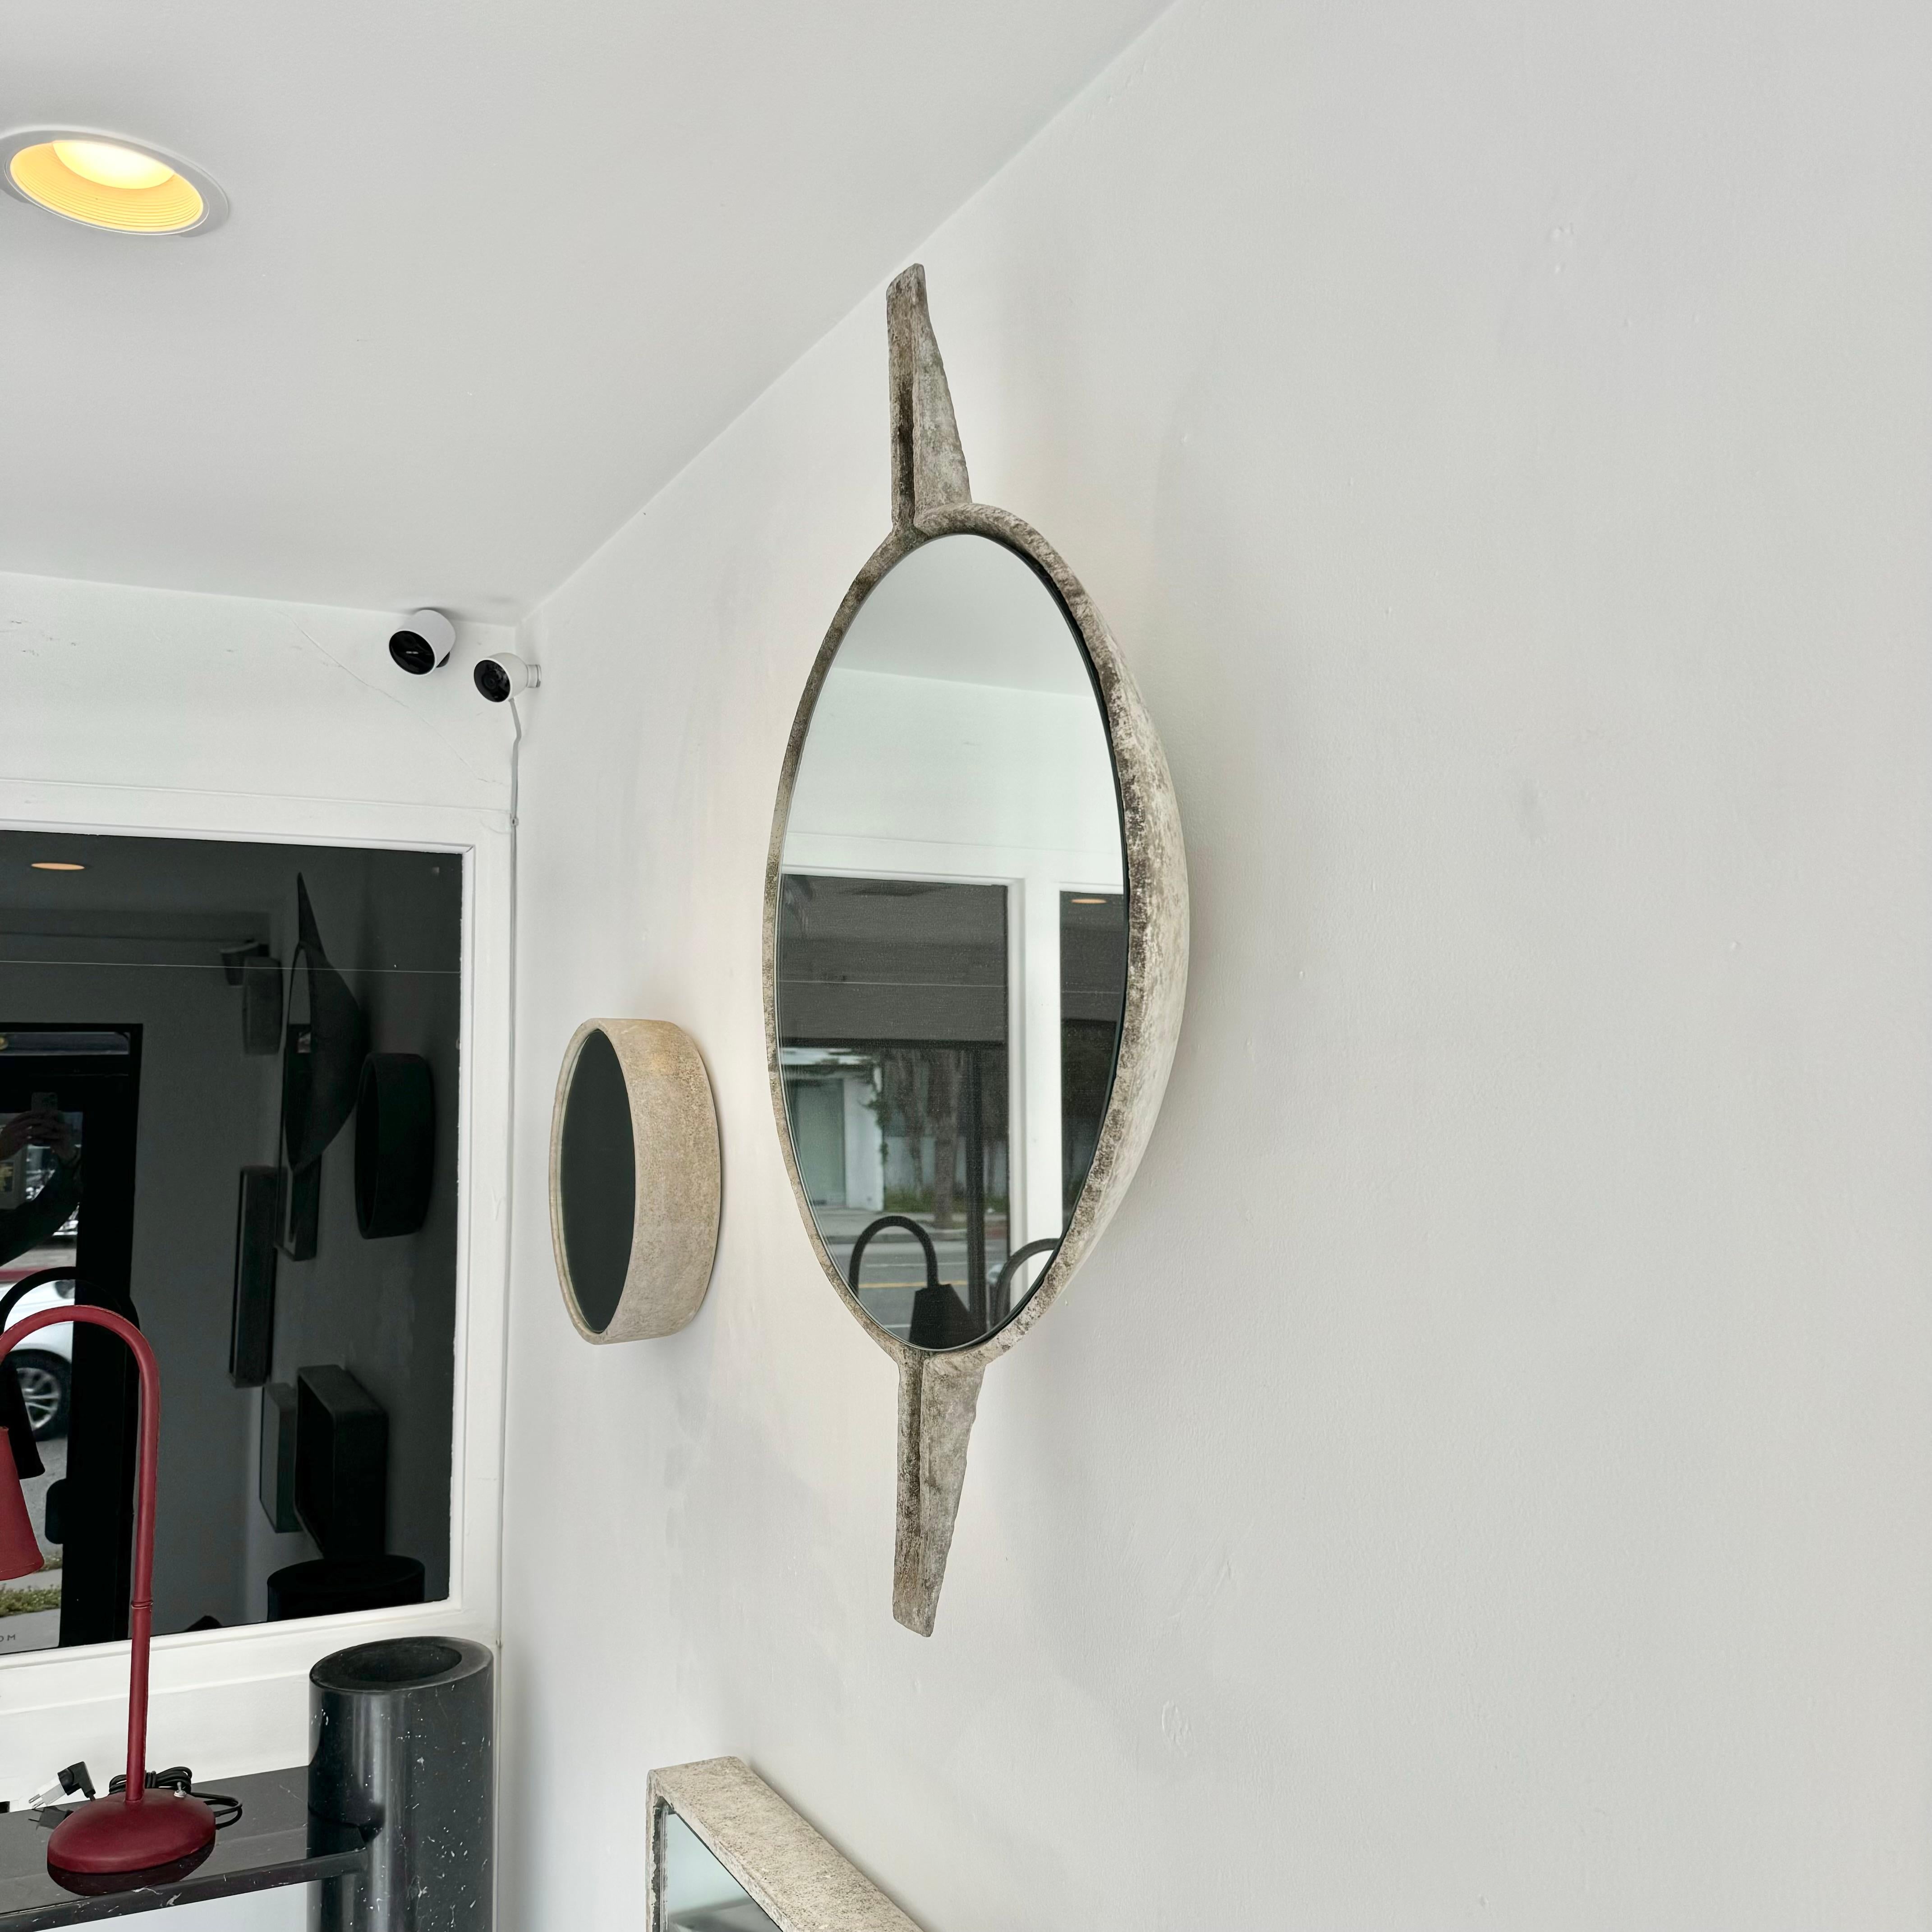 Beautiful Willy Guhl concrete mirror. Round bowl with vertical spikes. Substantial concrete vessel originally produced at the Eternit factory in Switzerland in the 1960’s. Custom mirror/glass was professionally hand cut and added recently. Beautiful